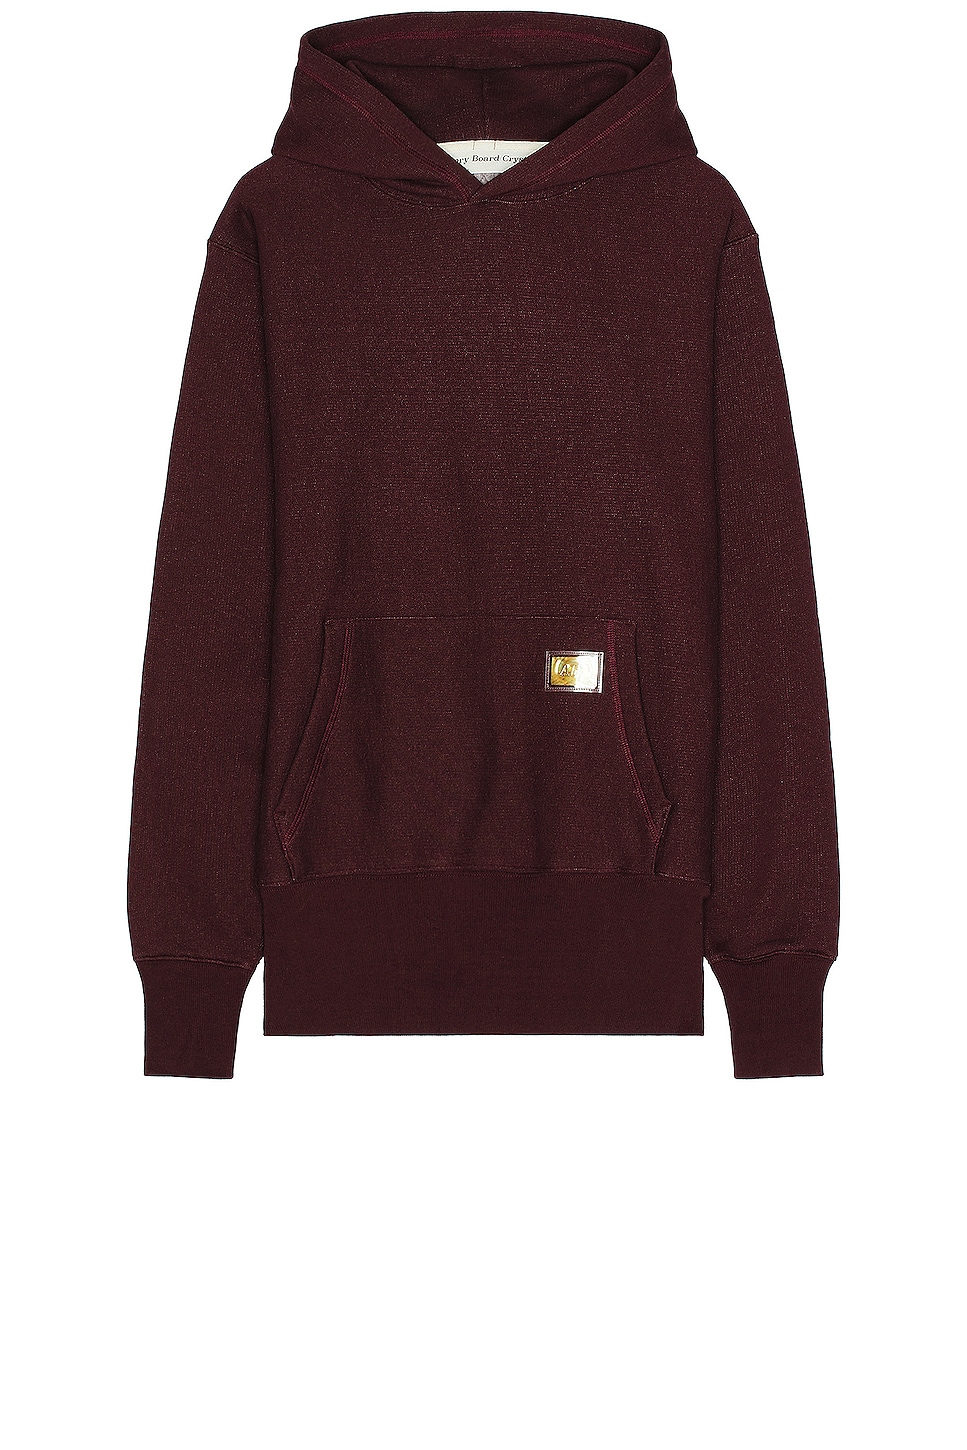 Image 1 of Advisory Board Crystals Pullover Hoodie in Port